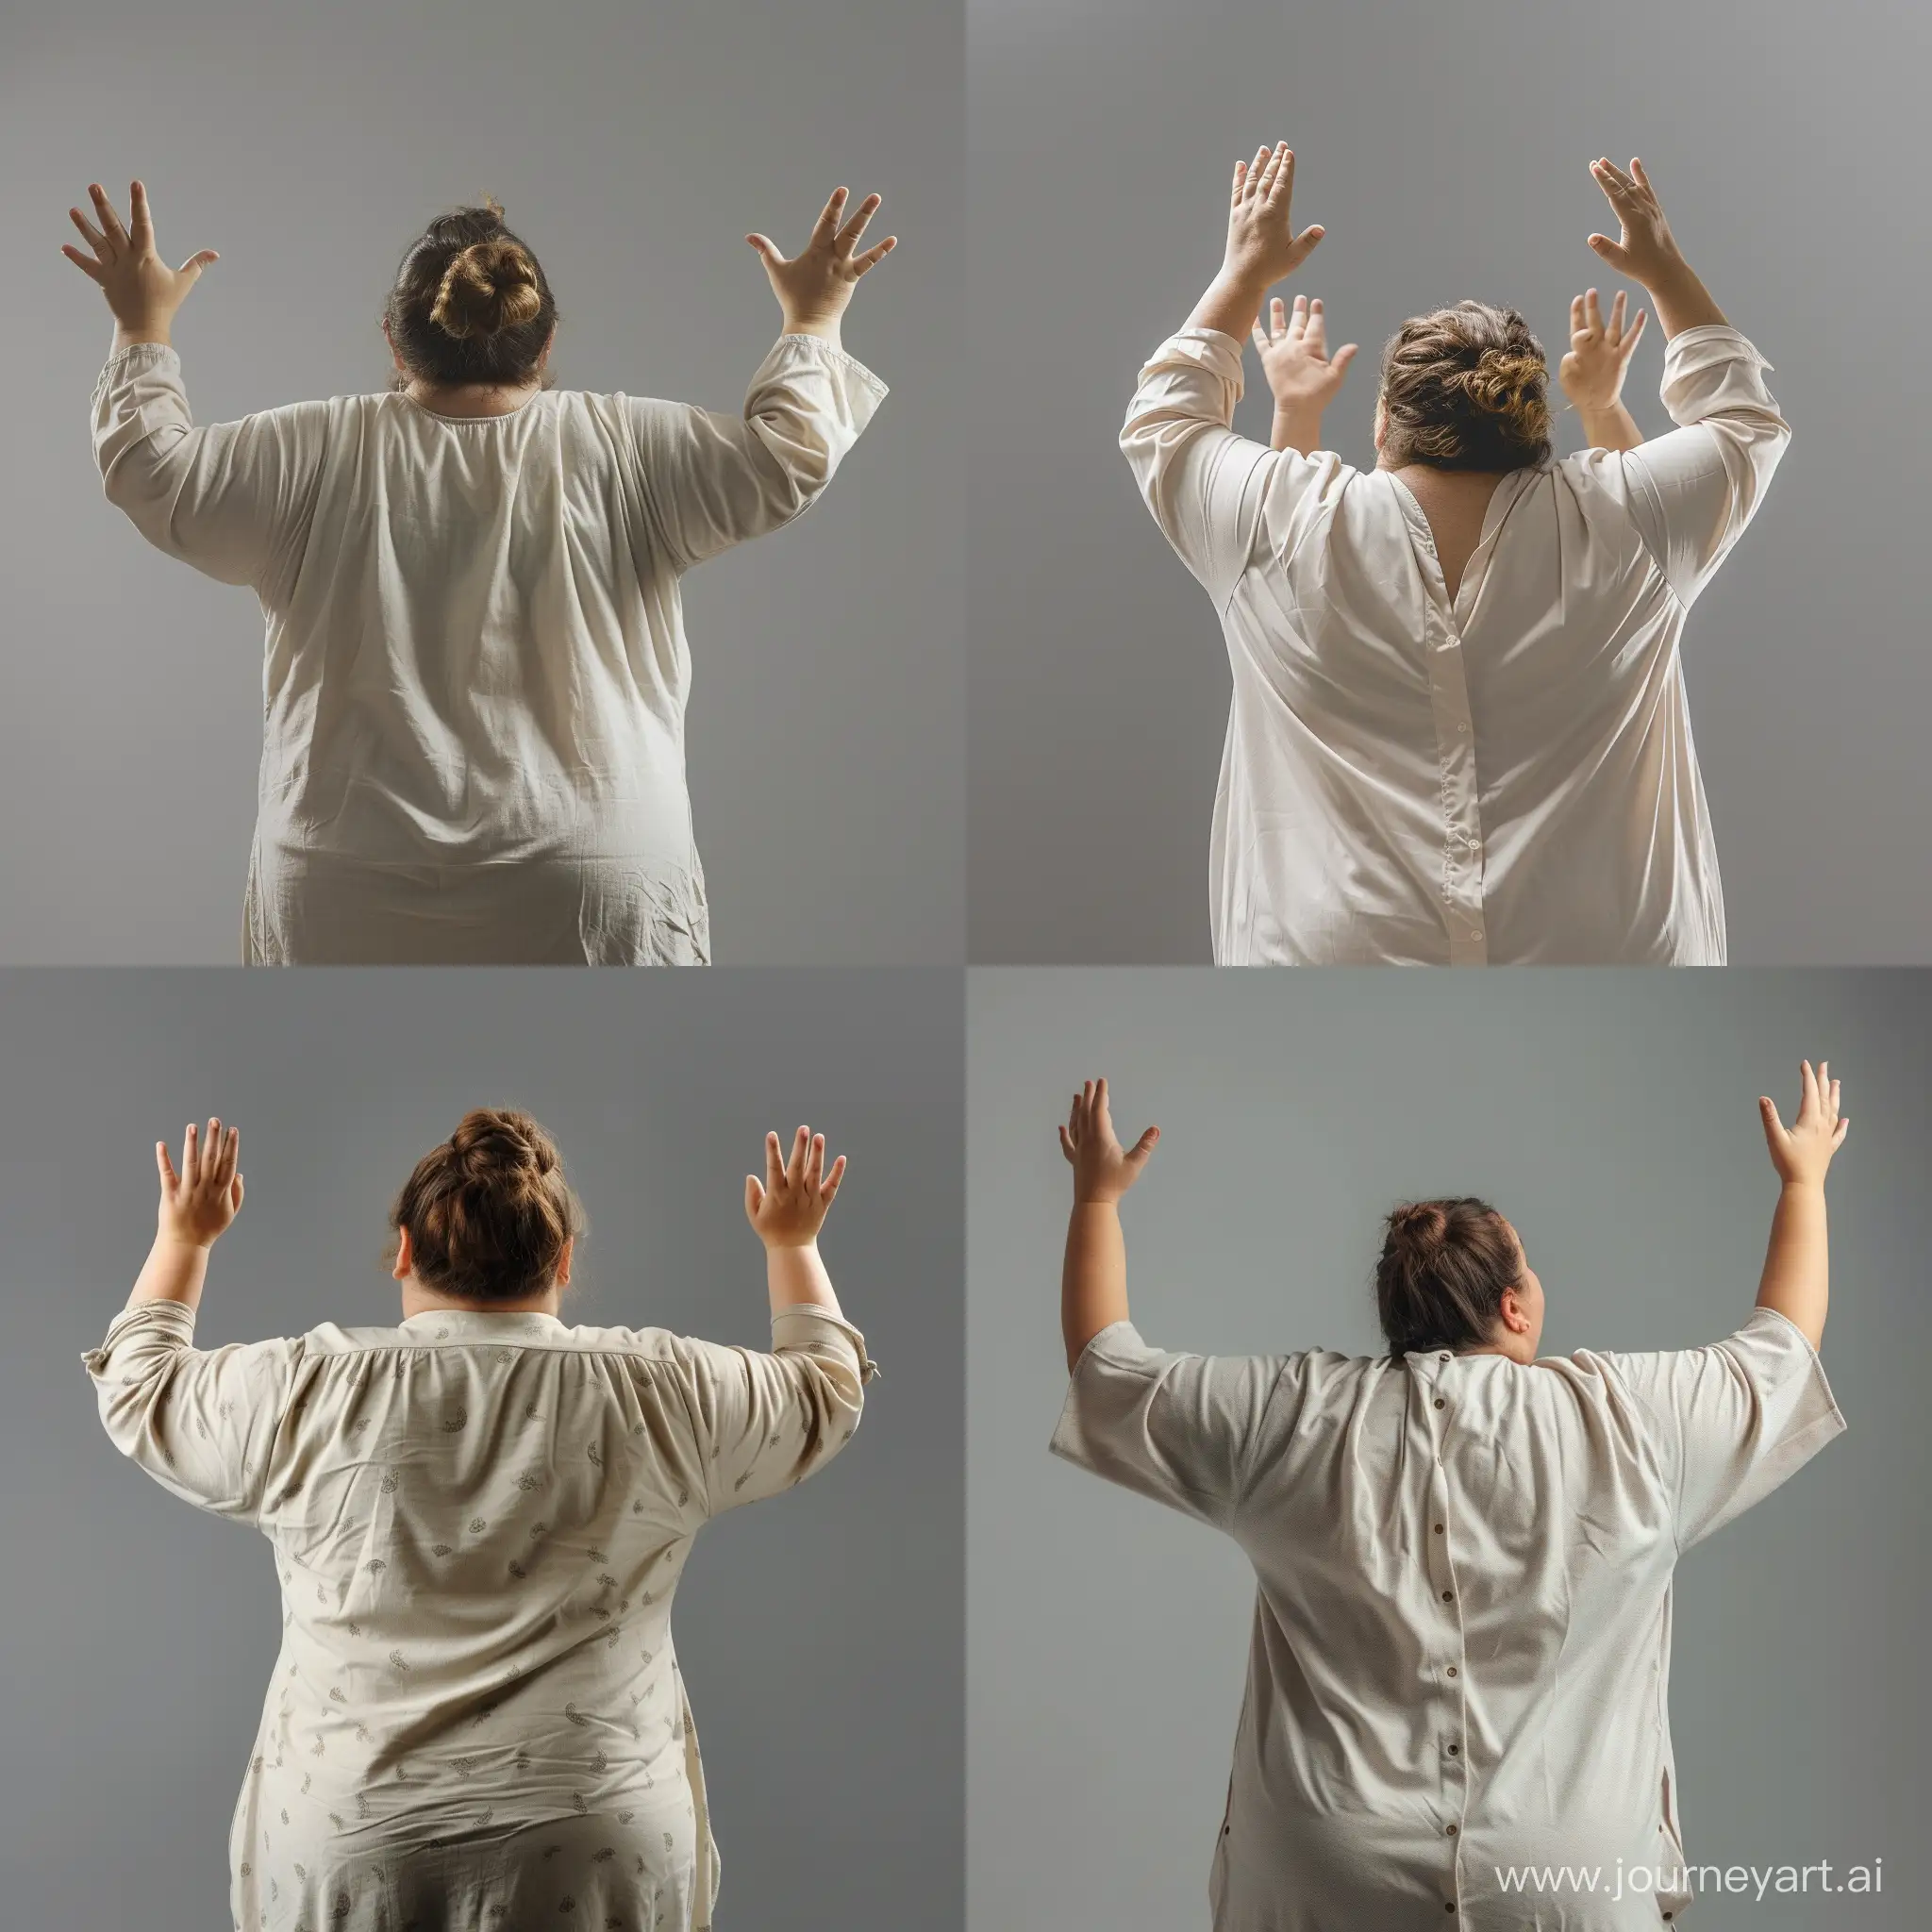 Joyful-PlusSize-Woman-in-Nightshirt-with-Raised-Hands-on-Gray-Background